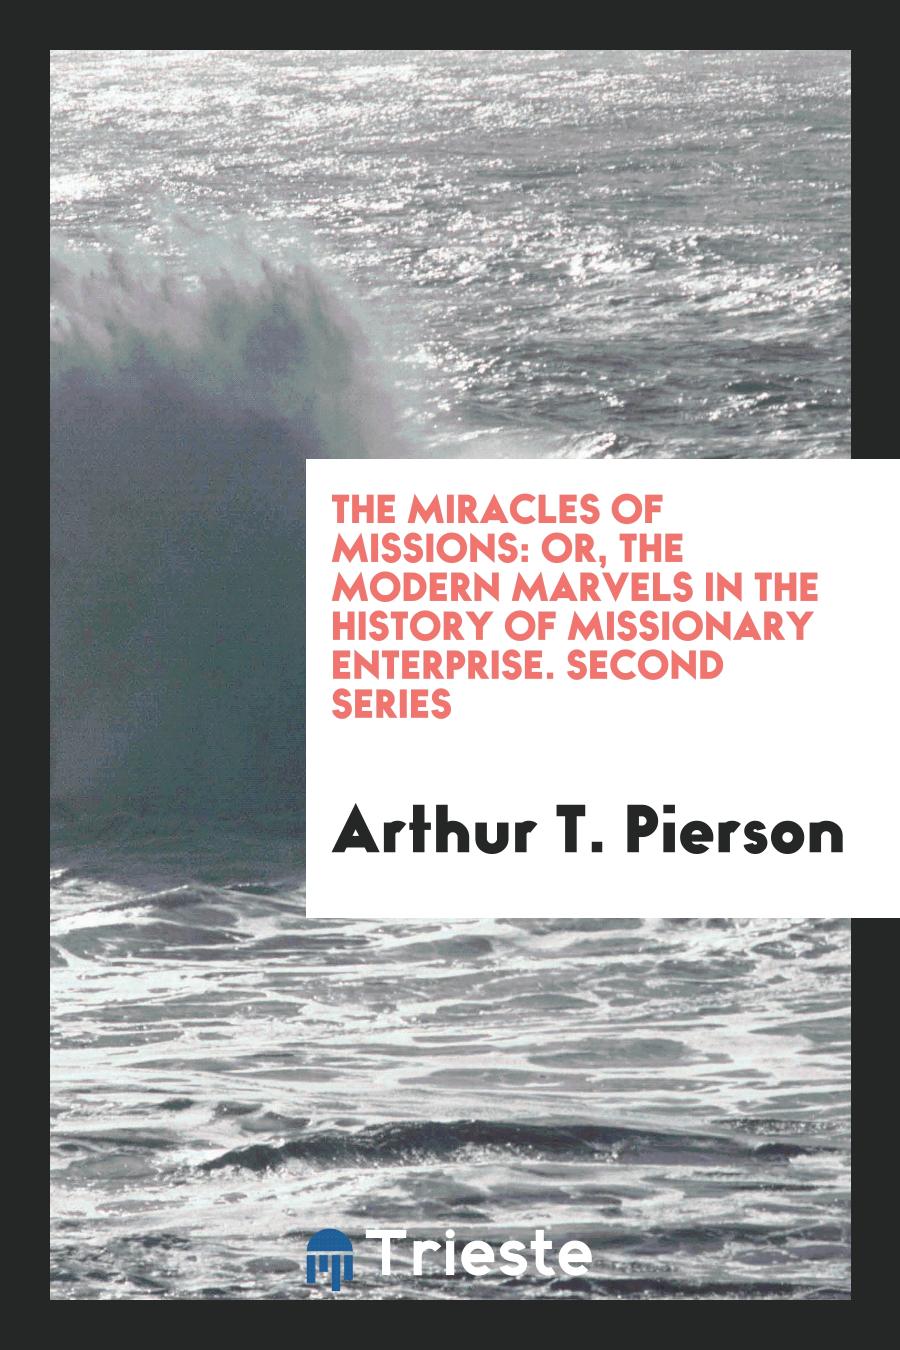 The Miracles of Missions: Or, The Modern Marvels in the History of Missionary Enterprise. Second Series